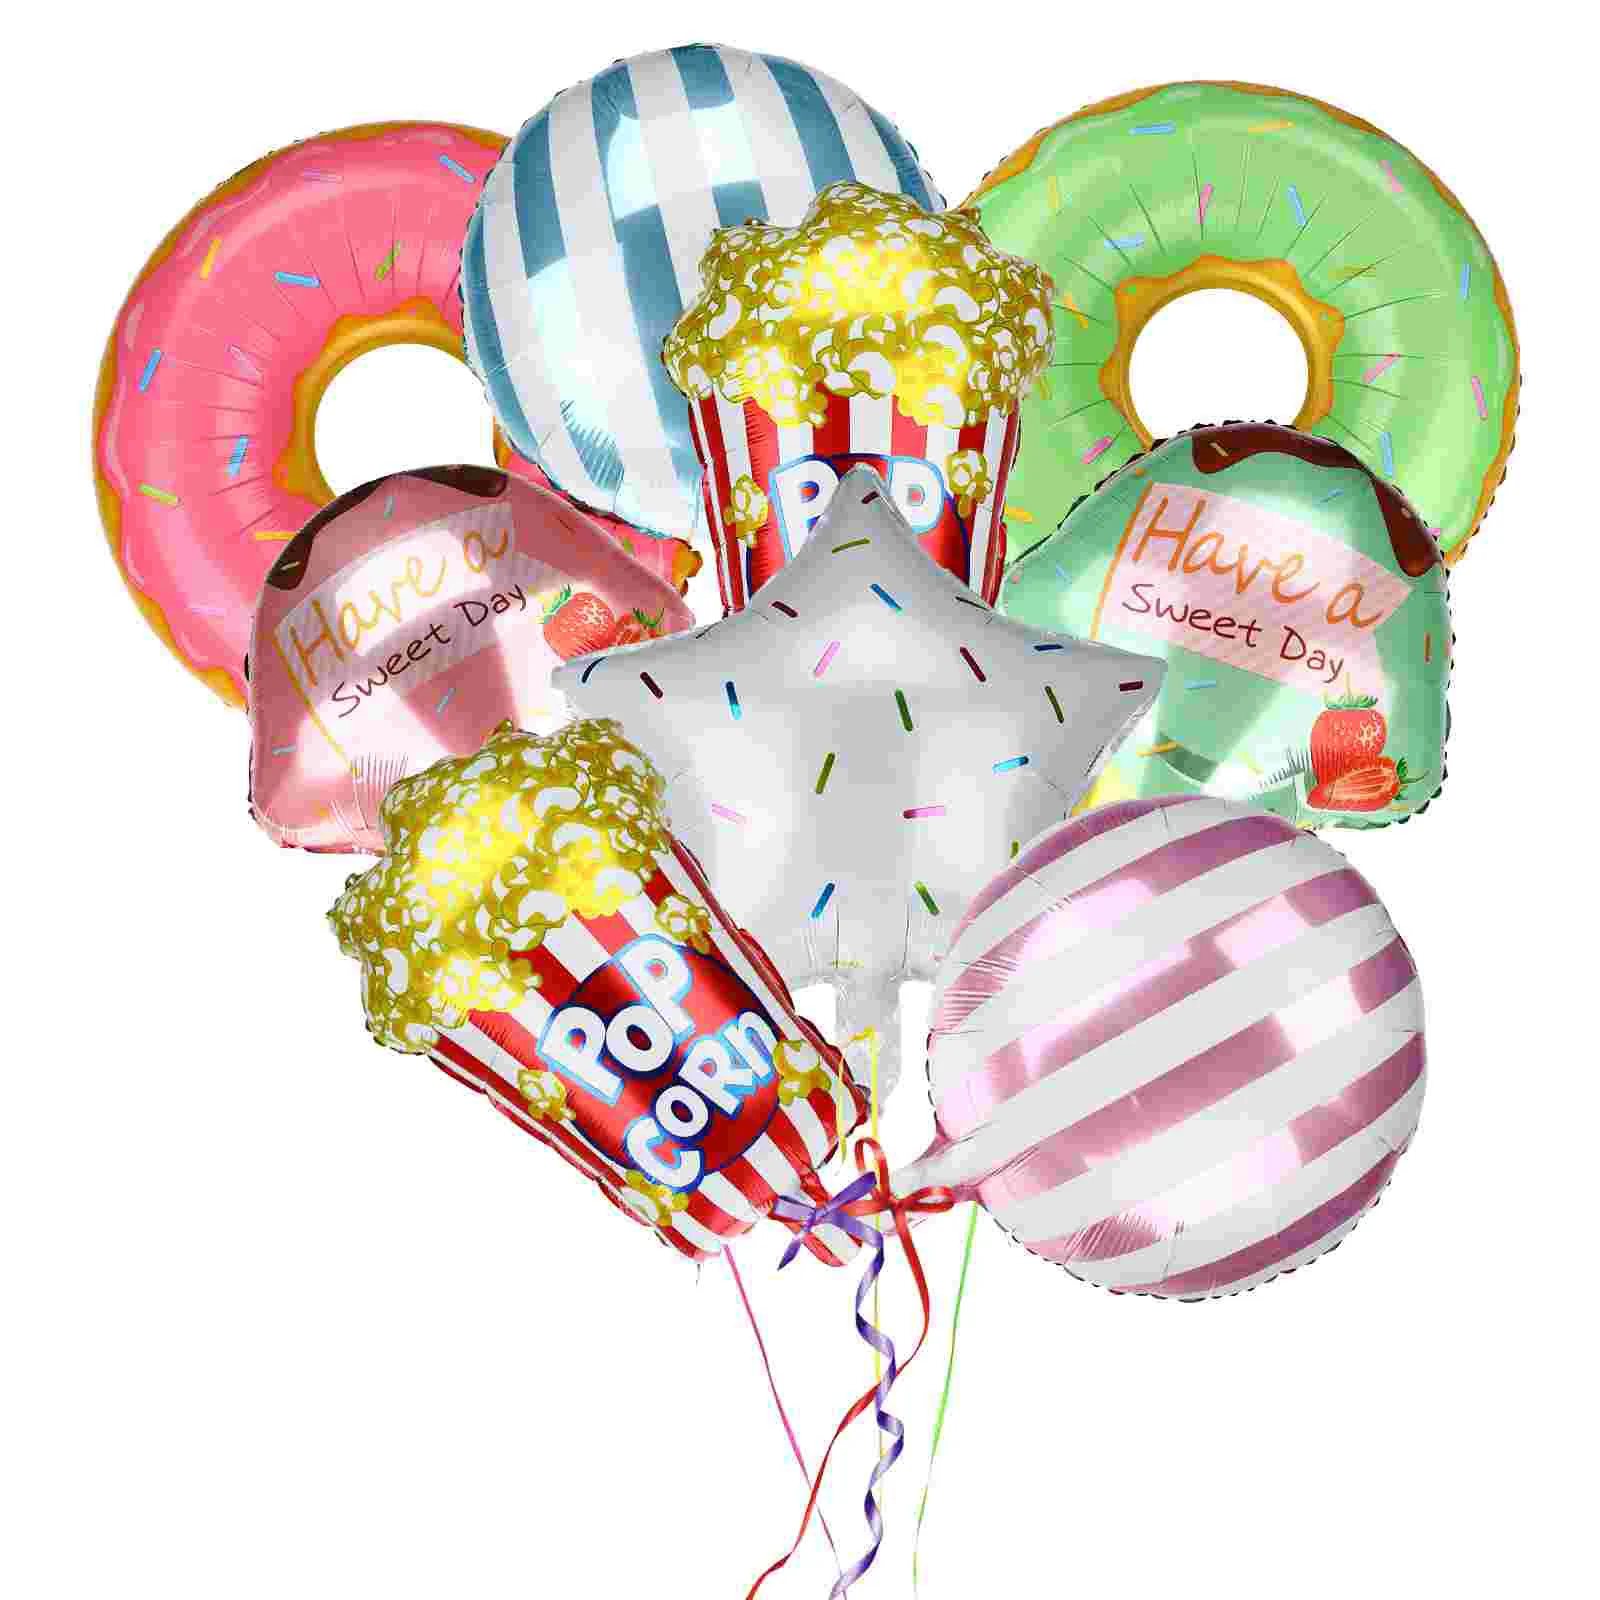 

9pcs Donut Balloons Ice Cream Birthday Party Balloons Decorations Aluminum Foil Balloons Party Supplies (Mixed Styles)